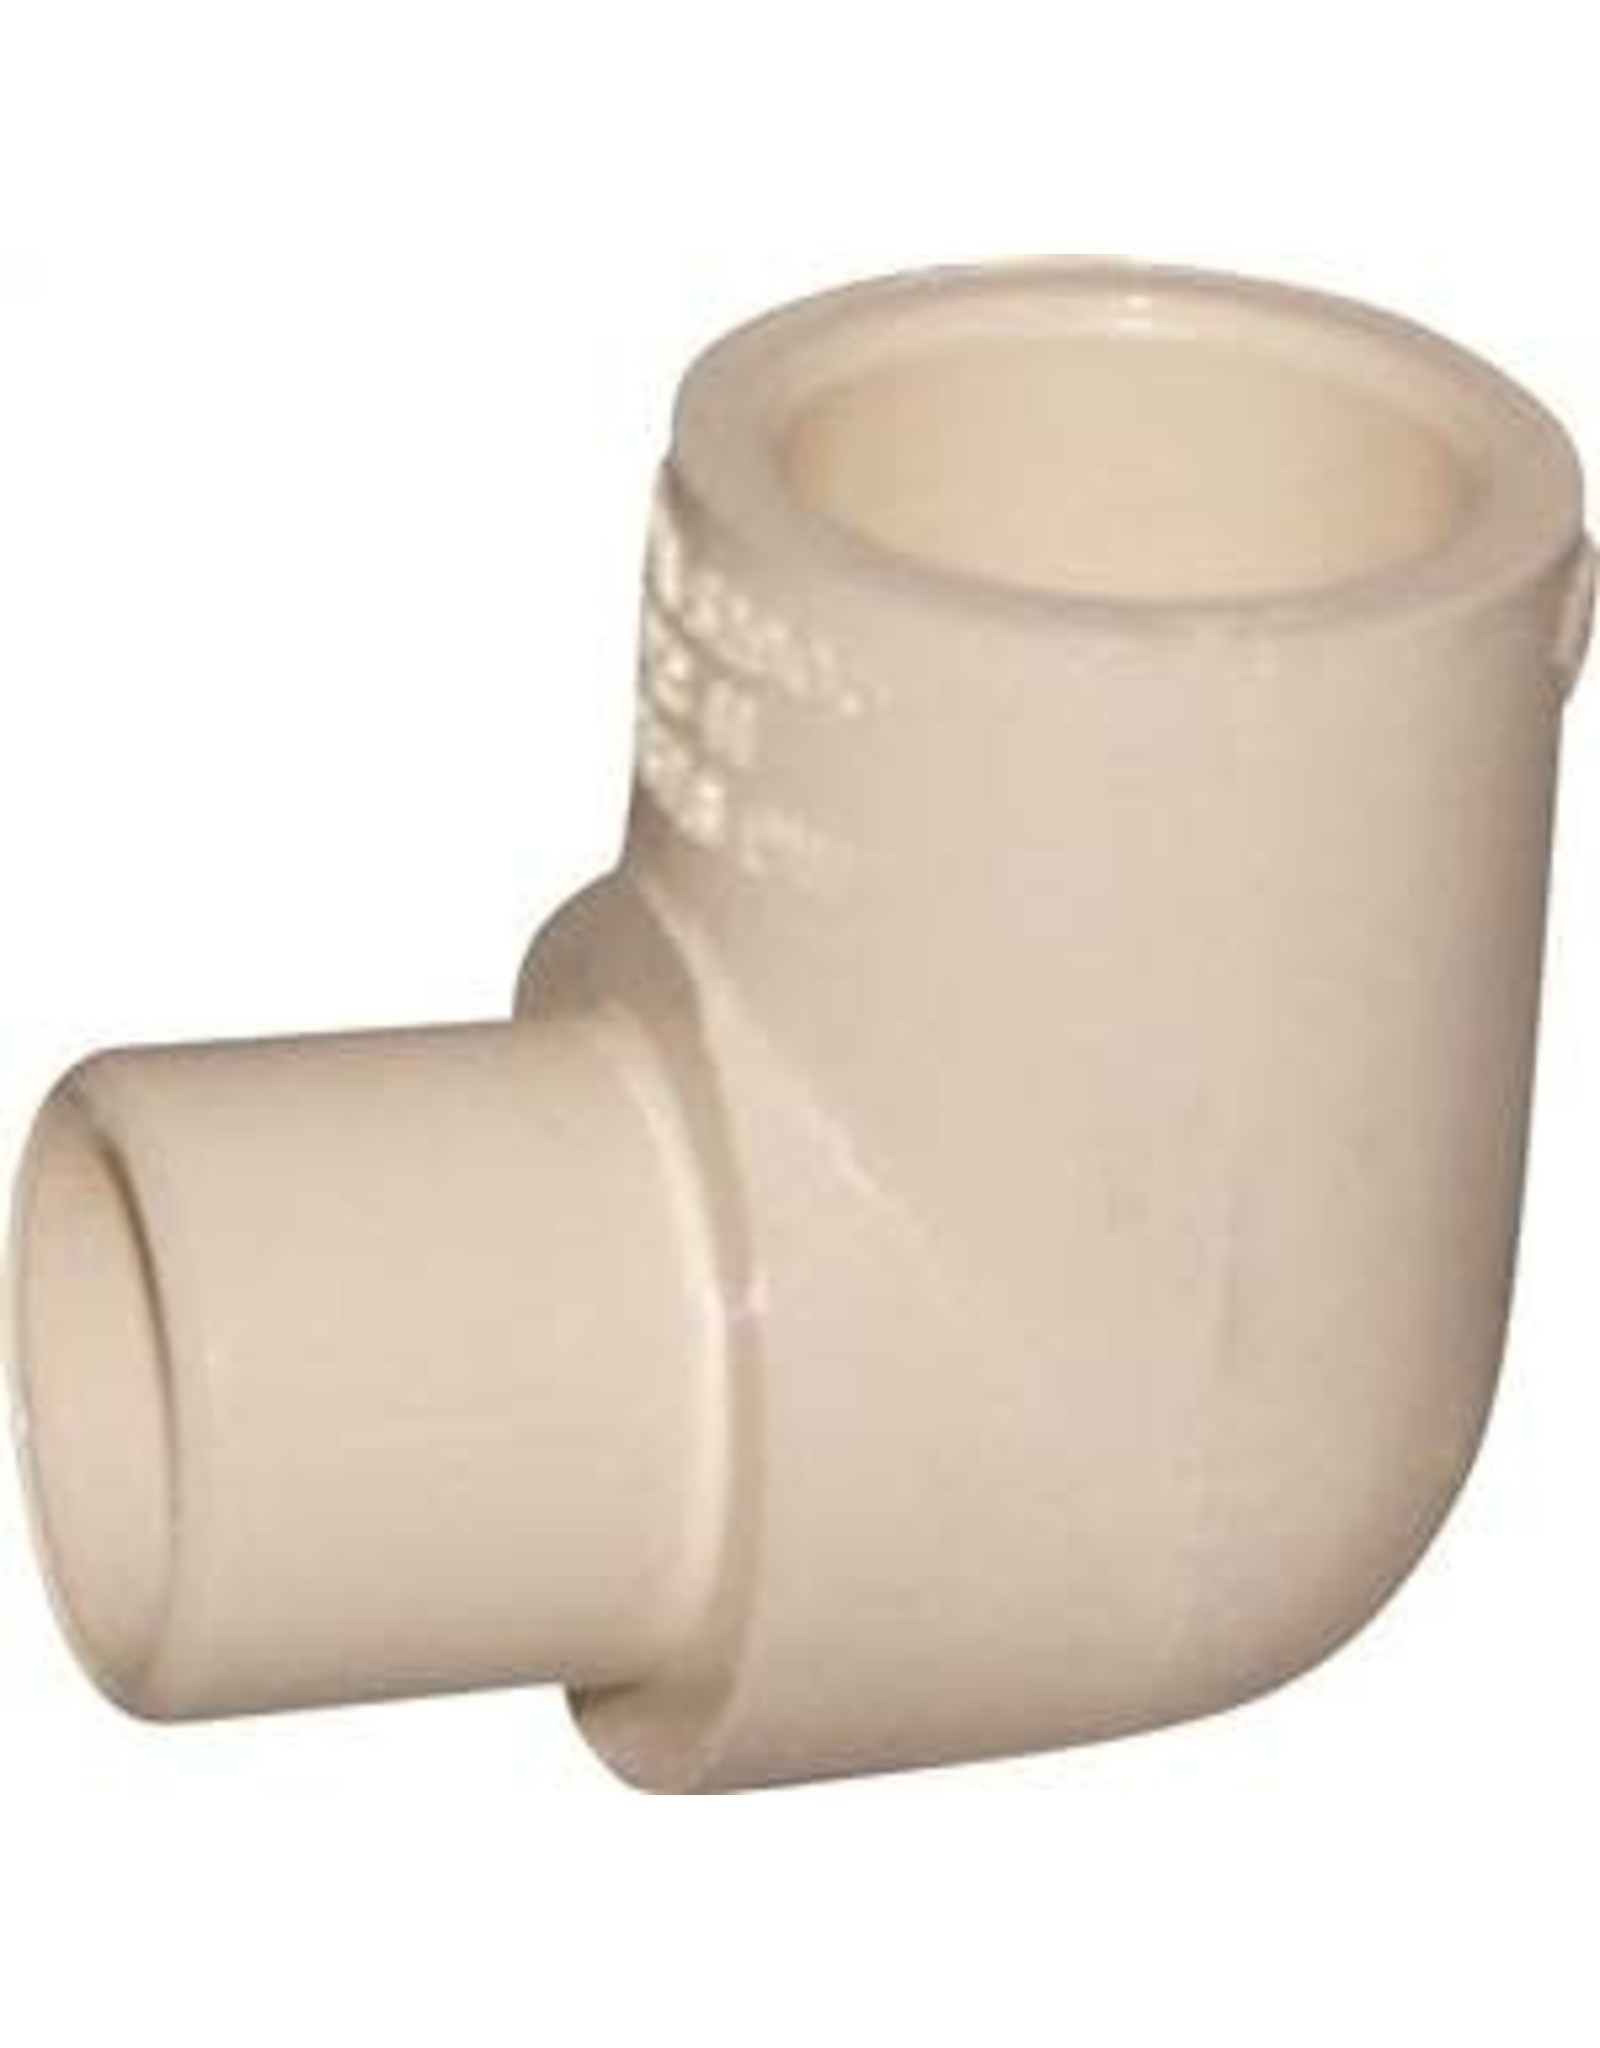 Nibco NIBCO T00130D Street Elbow, 1/2 in, 90 deg Angle, CPVC, 40 Schedule